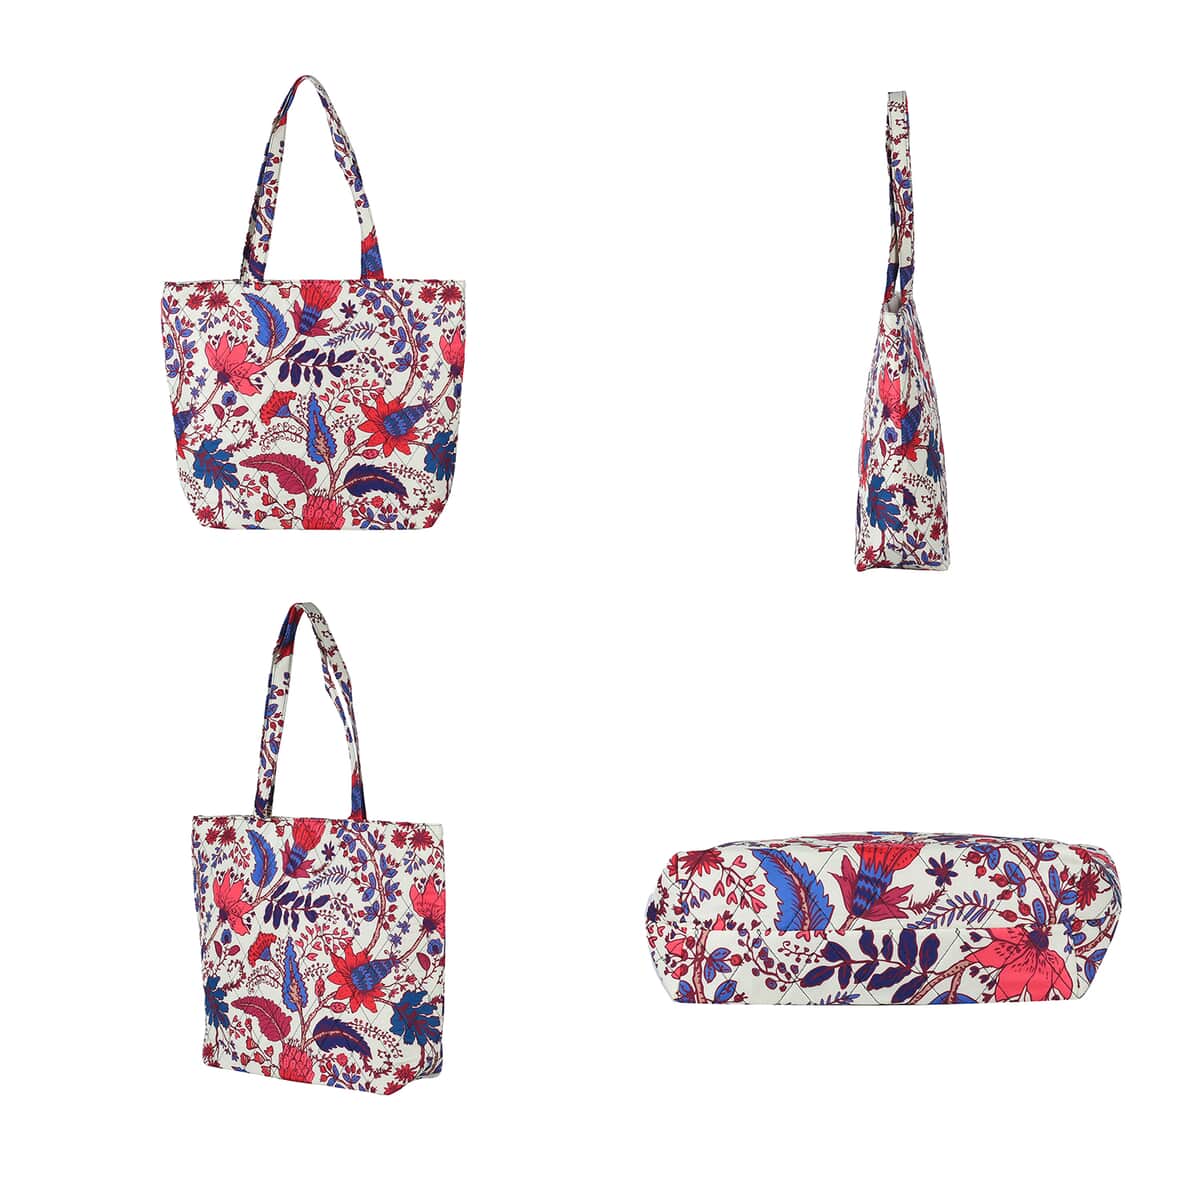 Beige and Mulit Color Flower Pattern Tote Bag (17"x4.5"x13.5") image number 3